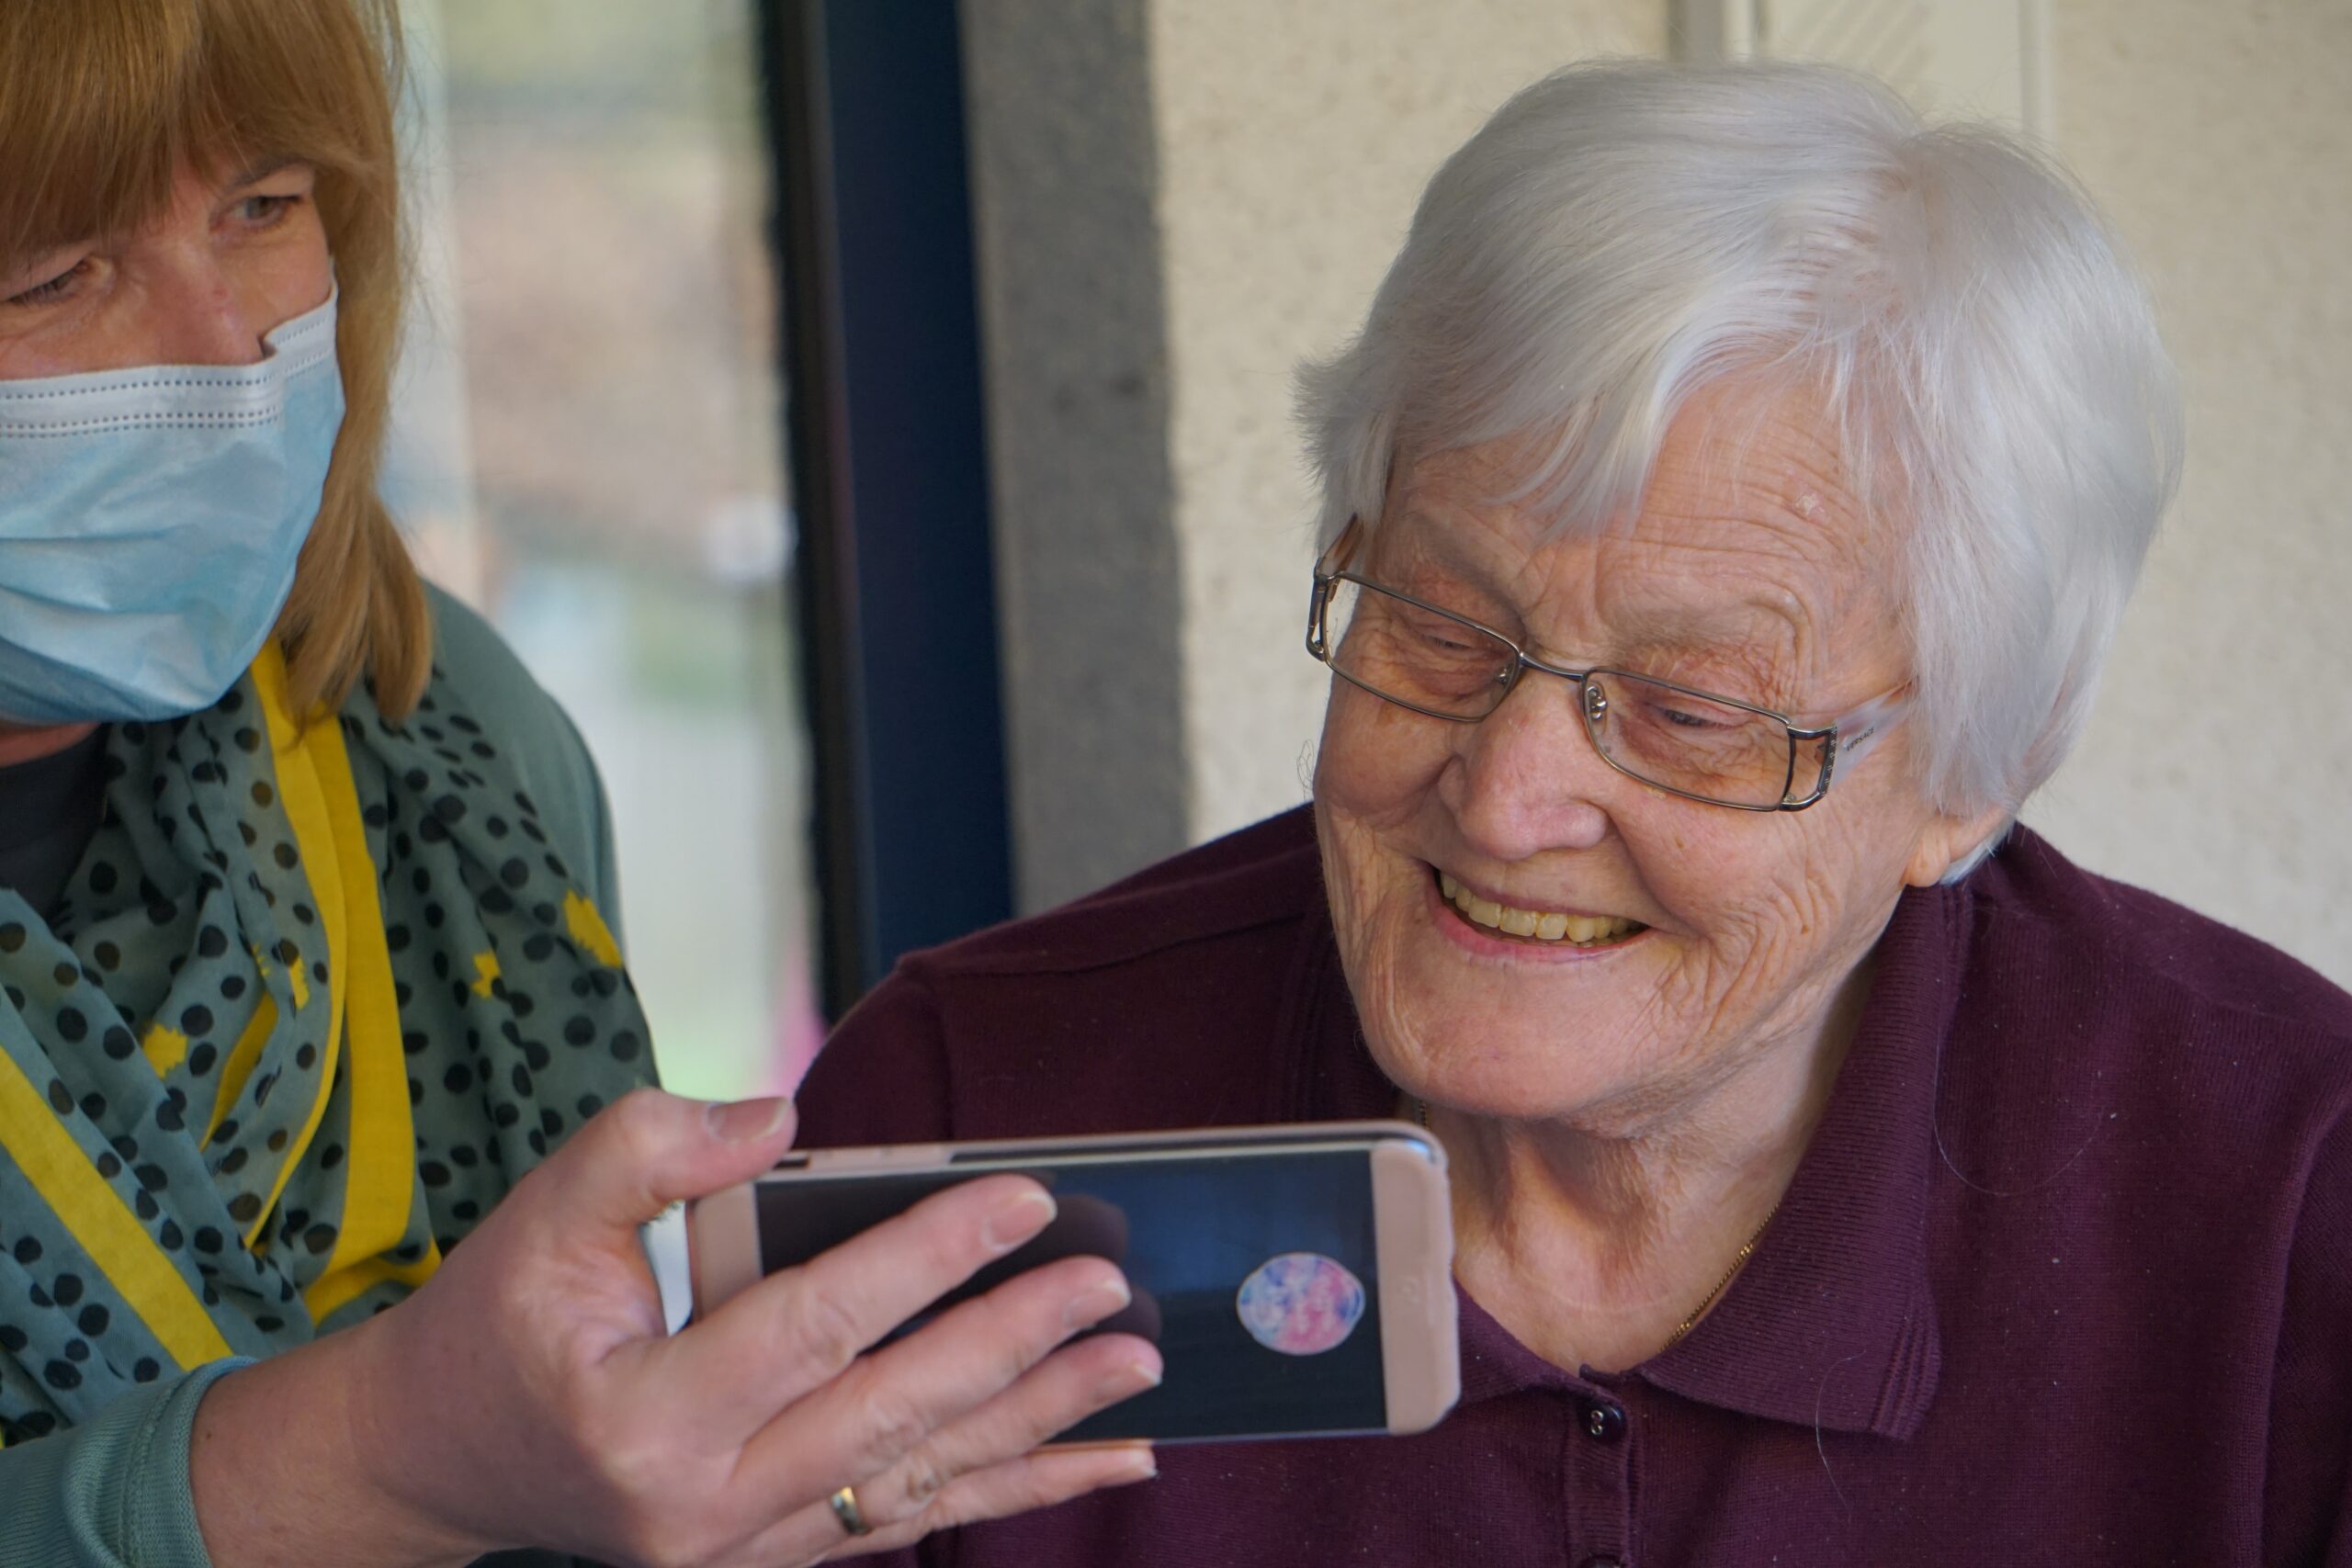 5 Ways to Stay in Touch with Loved Ones with Dementia